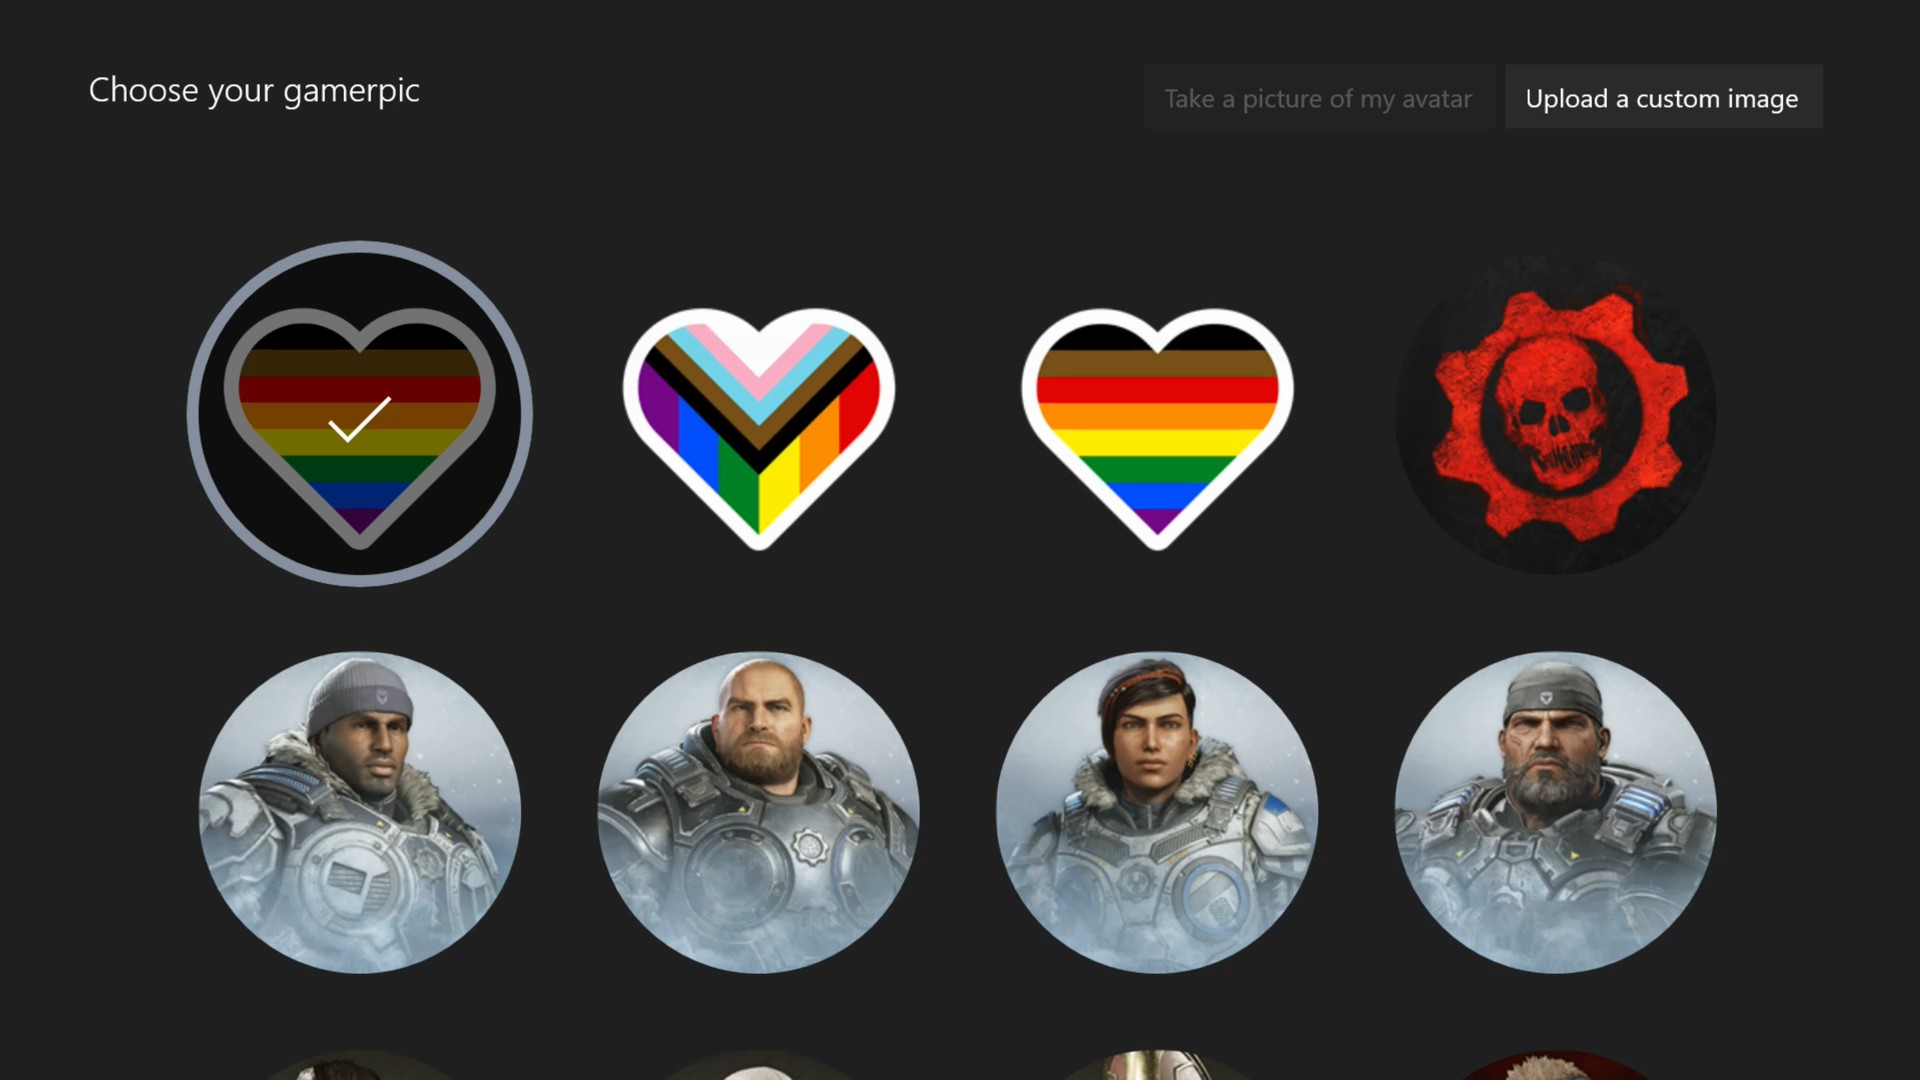 Play with Pride: Xbox Game Studios Publishing Announces Ongoing Partnership  with GLAAD and More - Xbox Wire